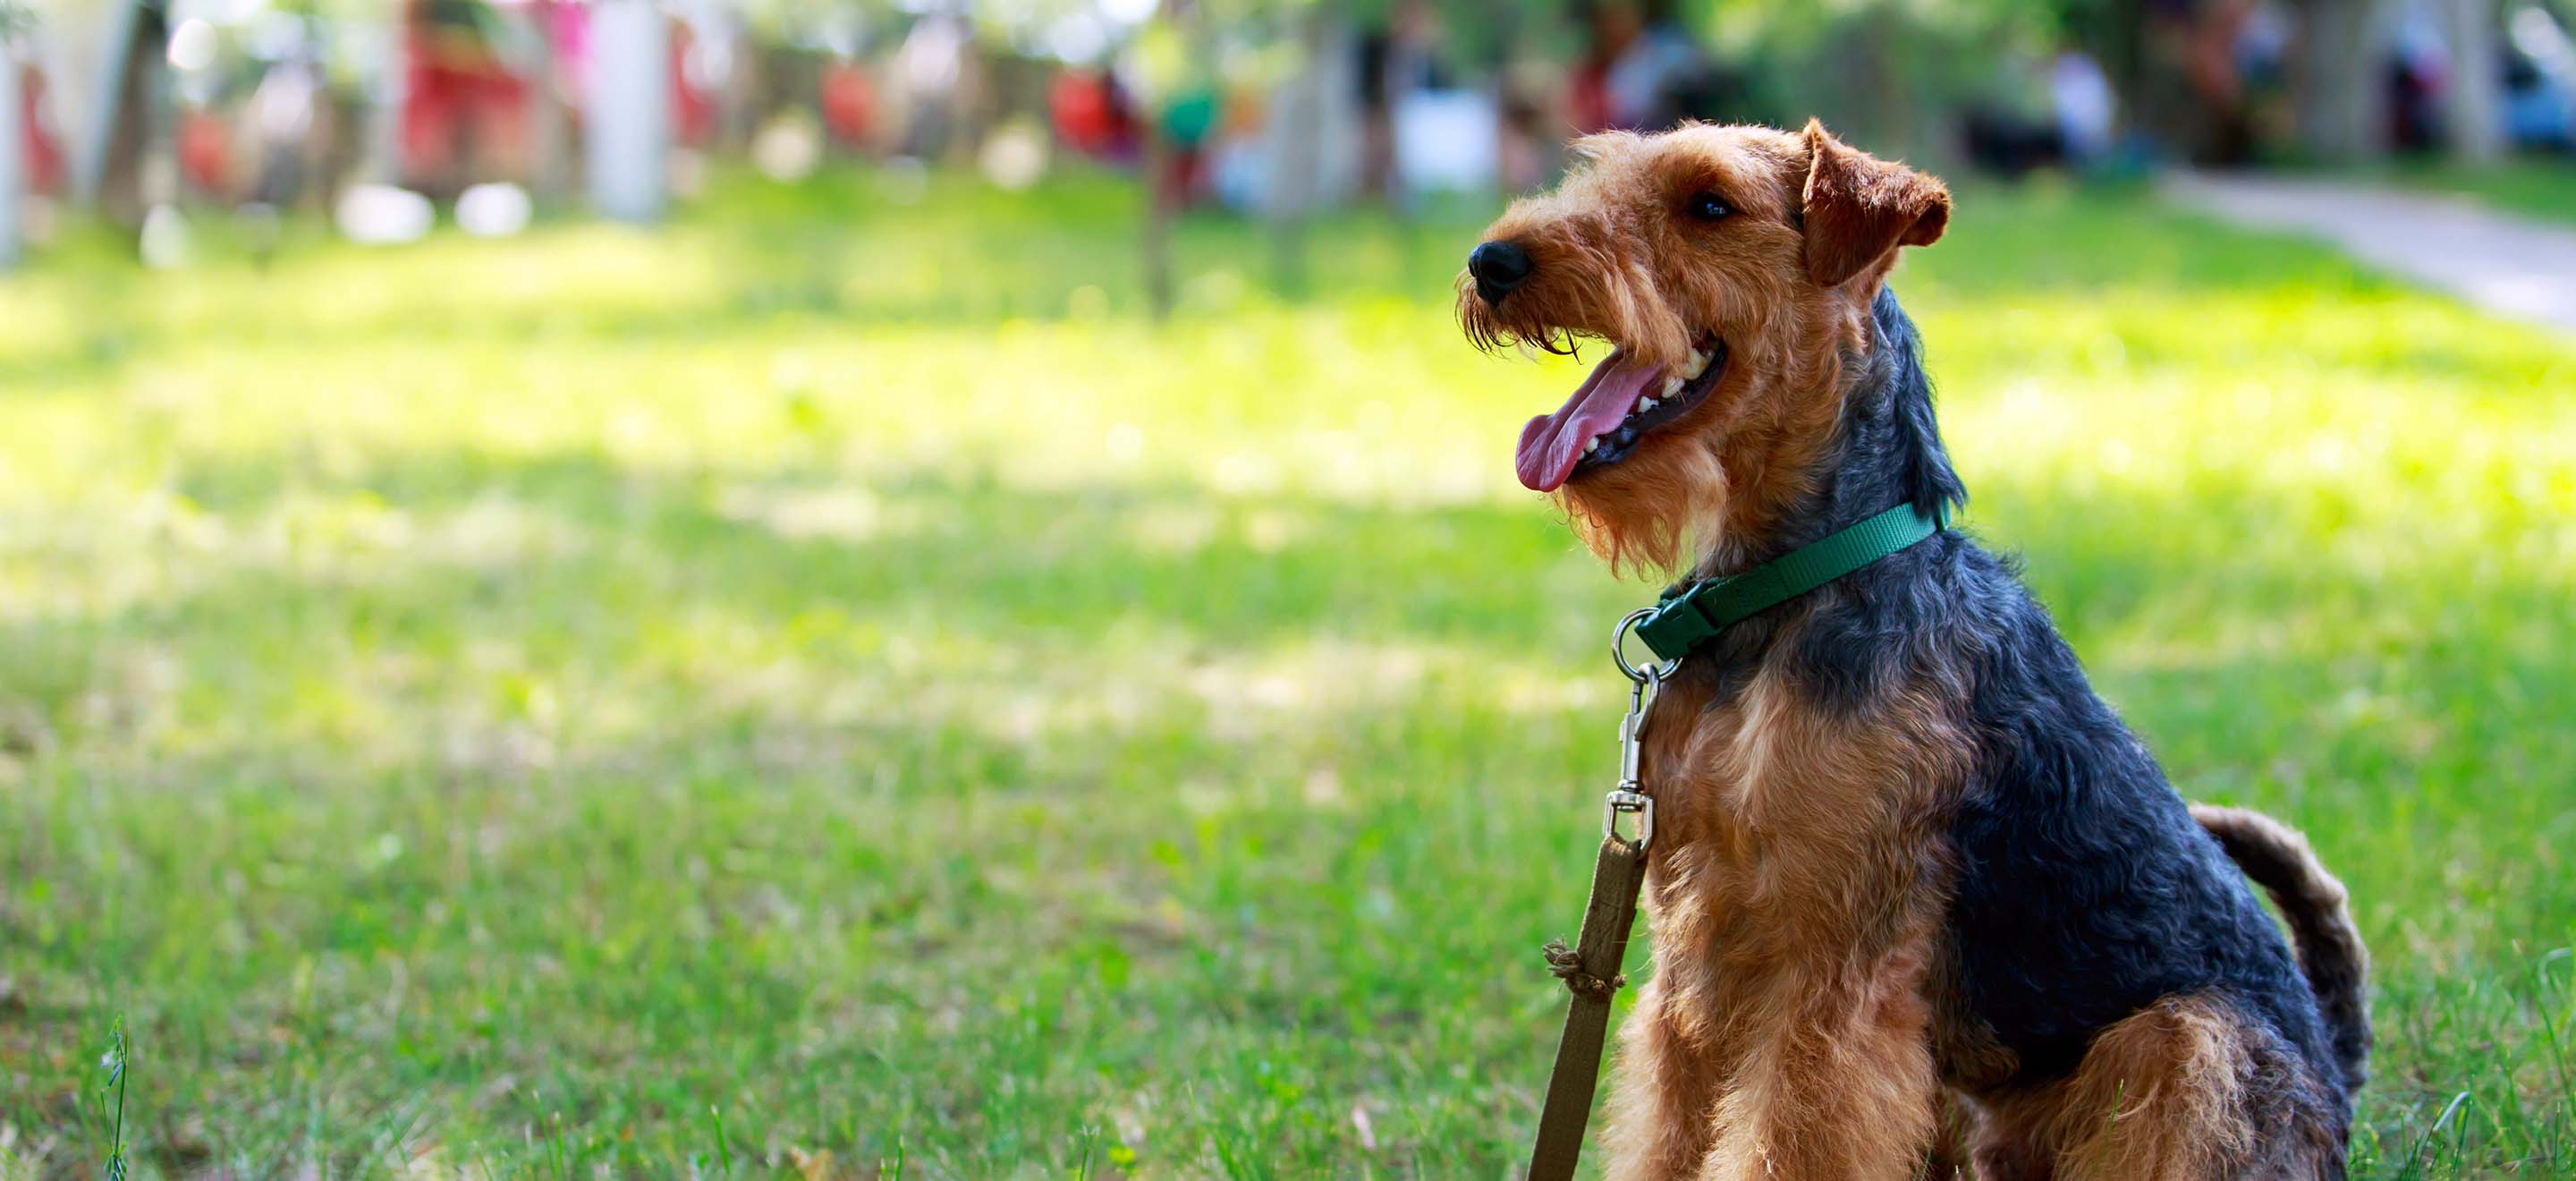 A Welsh Terrier dog on a leash standing in a grassy park image